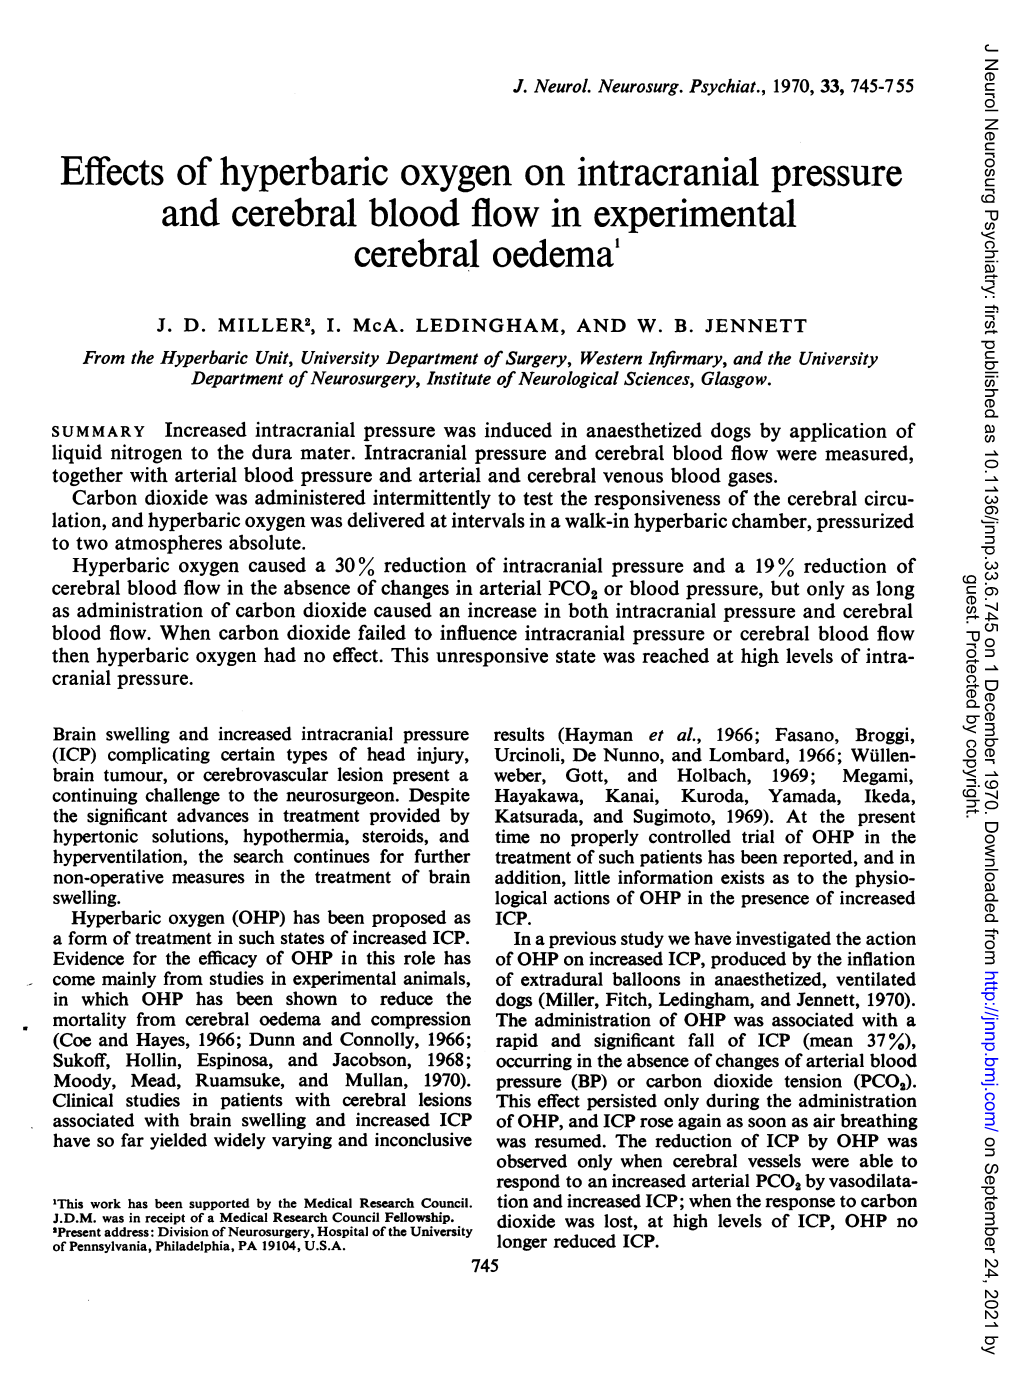 Effects of Hyperbaric Oxygen on Intracranial Pressure and Cerebral Blood Flow in Experimental Cerebral Oedema'